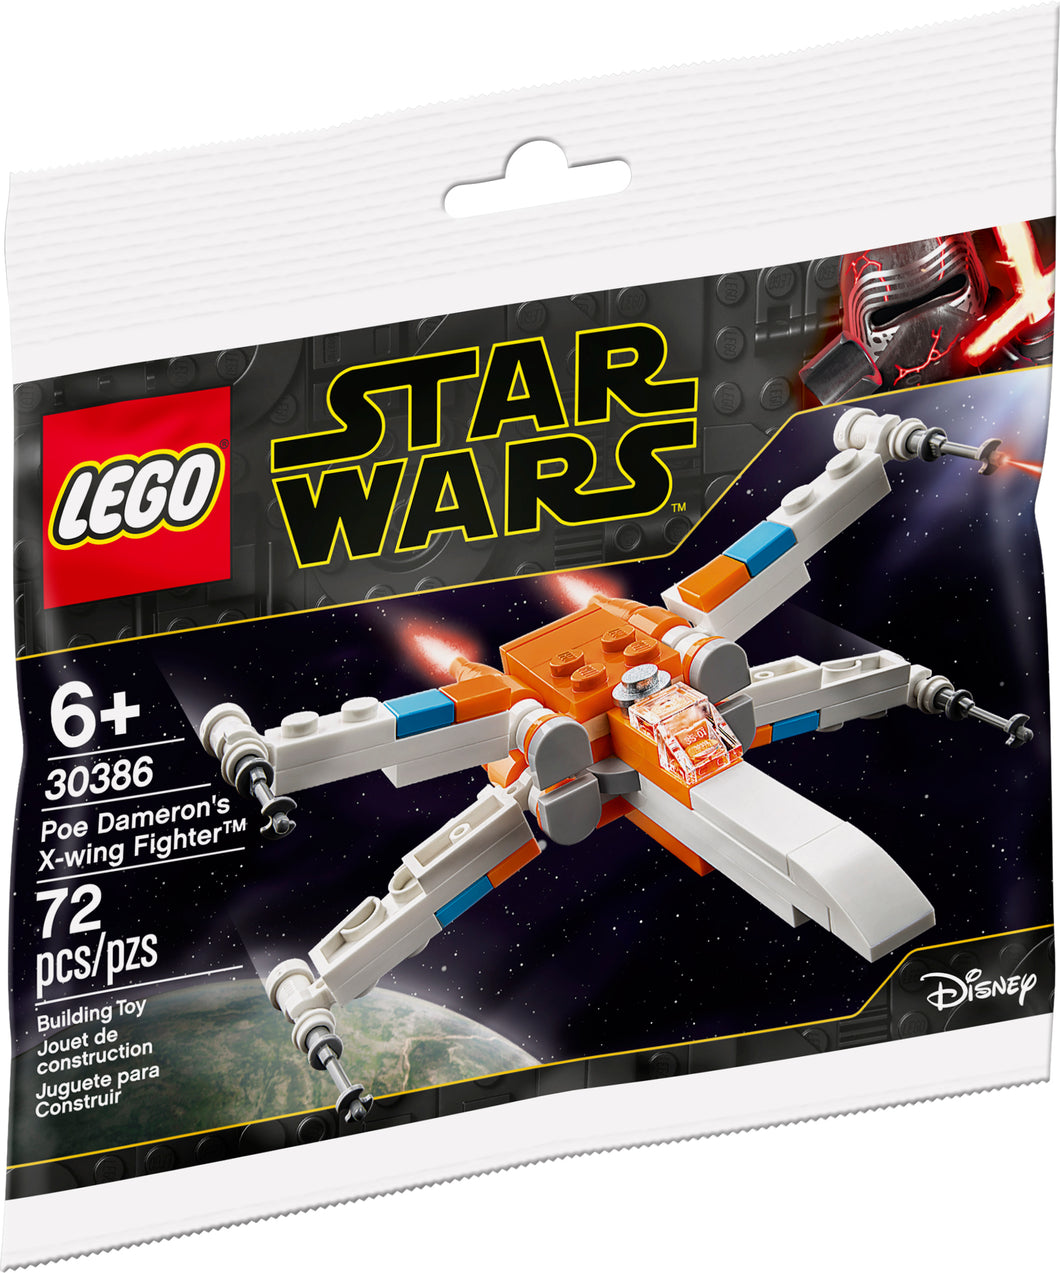 LEGO® Star Wars™ 30386 Poe Dameron's X-wing Fighter (72 pieces)